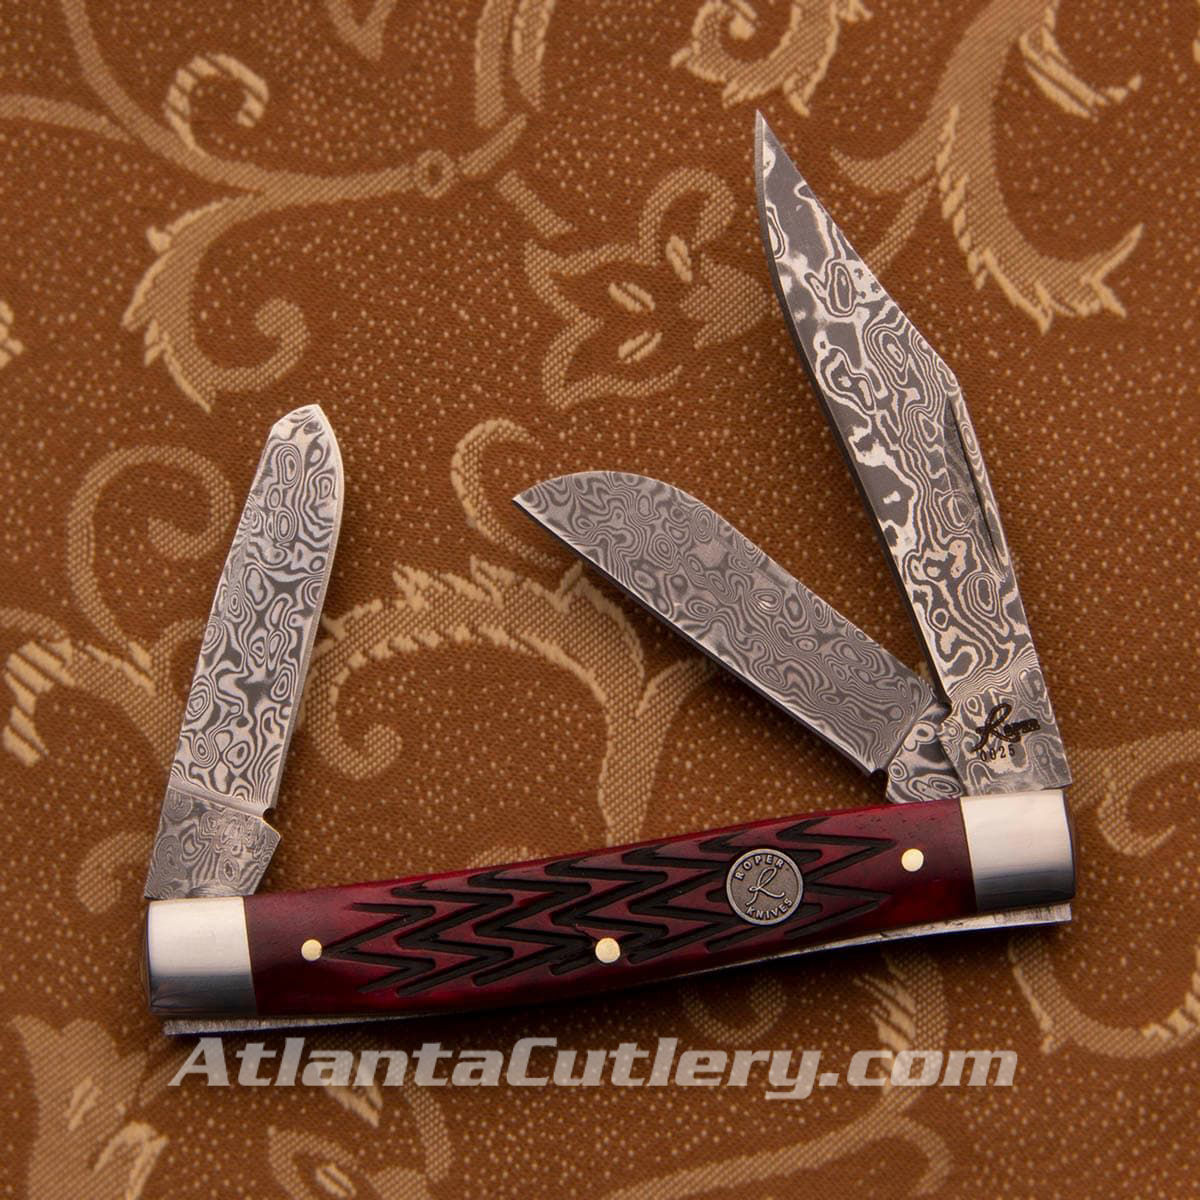 3 blades of this Roper pocket knife are 57 layer Damascus, the red jigged bone handles have a zigzag texture